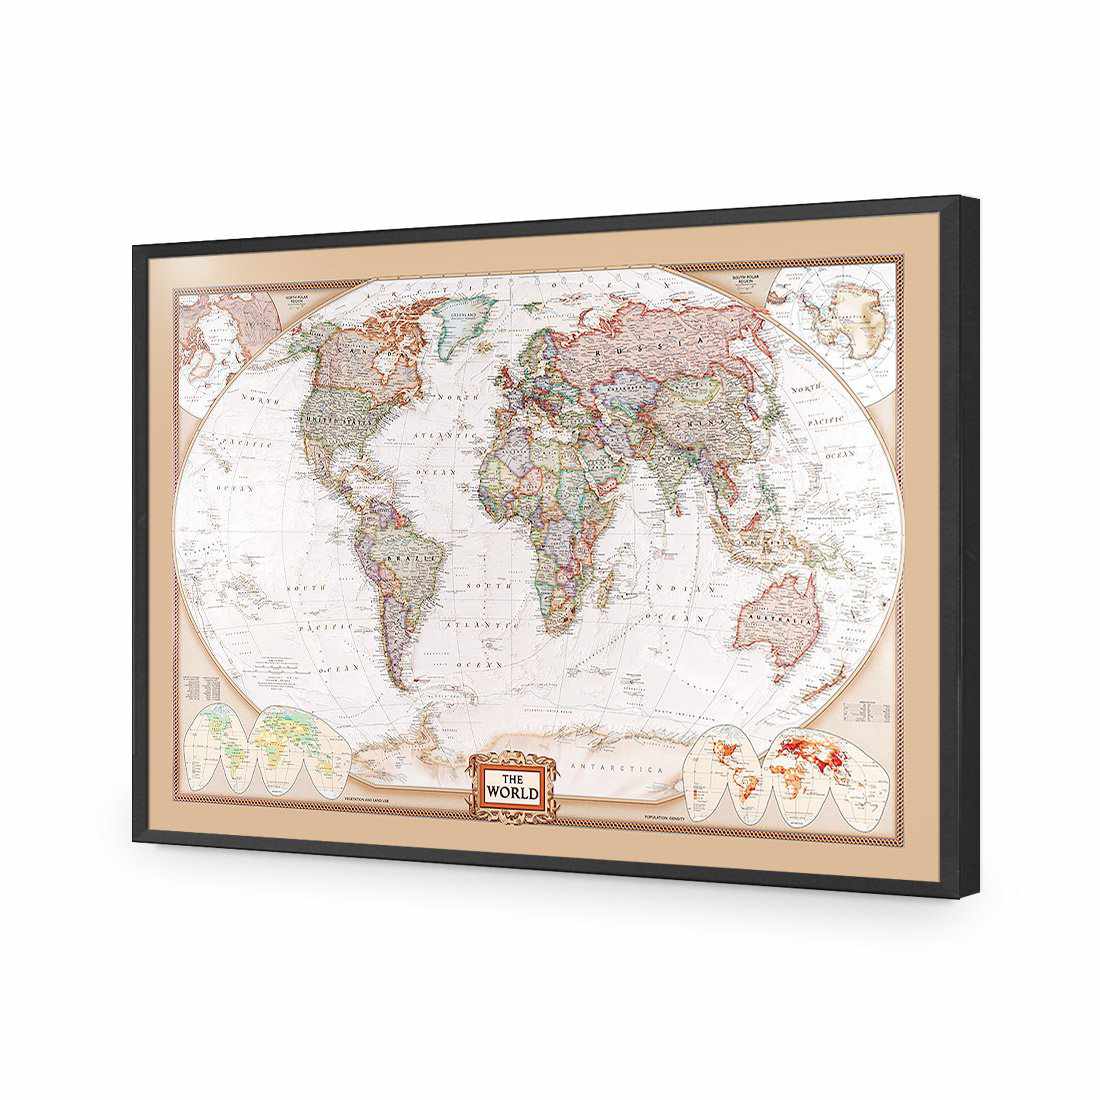 The World Map-Acrylic-Wall Art Design-Without Border-Acrylic - Black Frame-45x30cm-Wall Art Designs